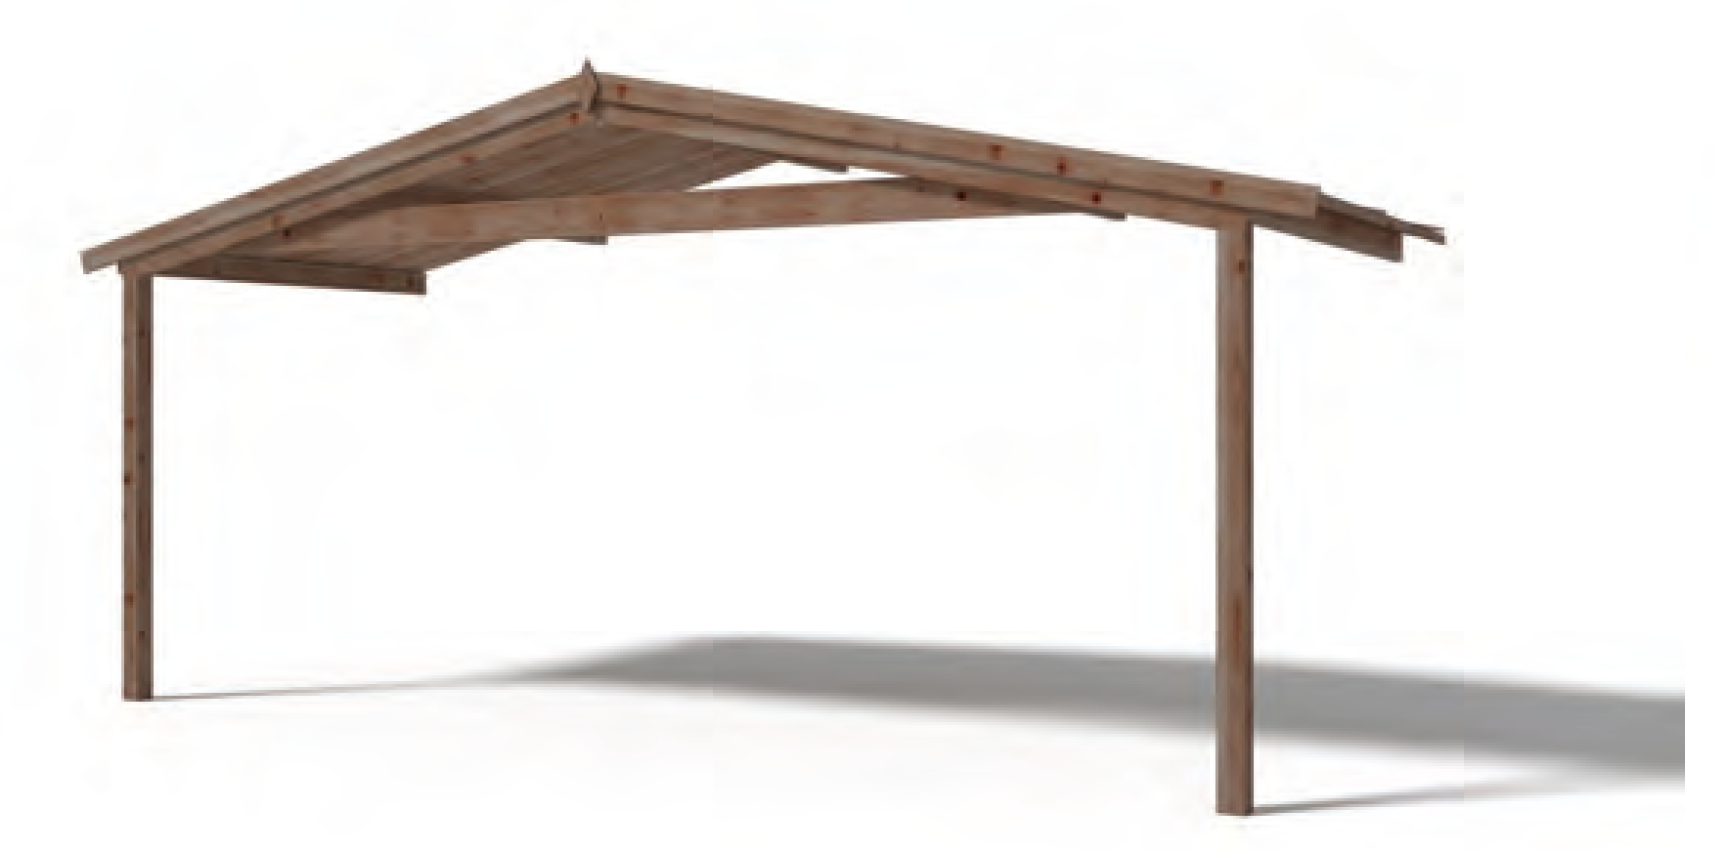 Zagreb roof and balcony for shelter in brown wood 500 x 200 cm